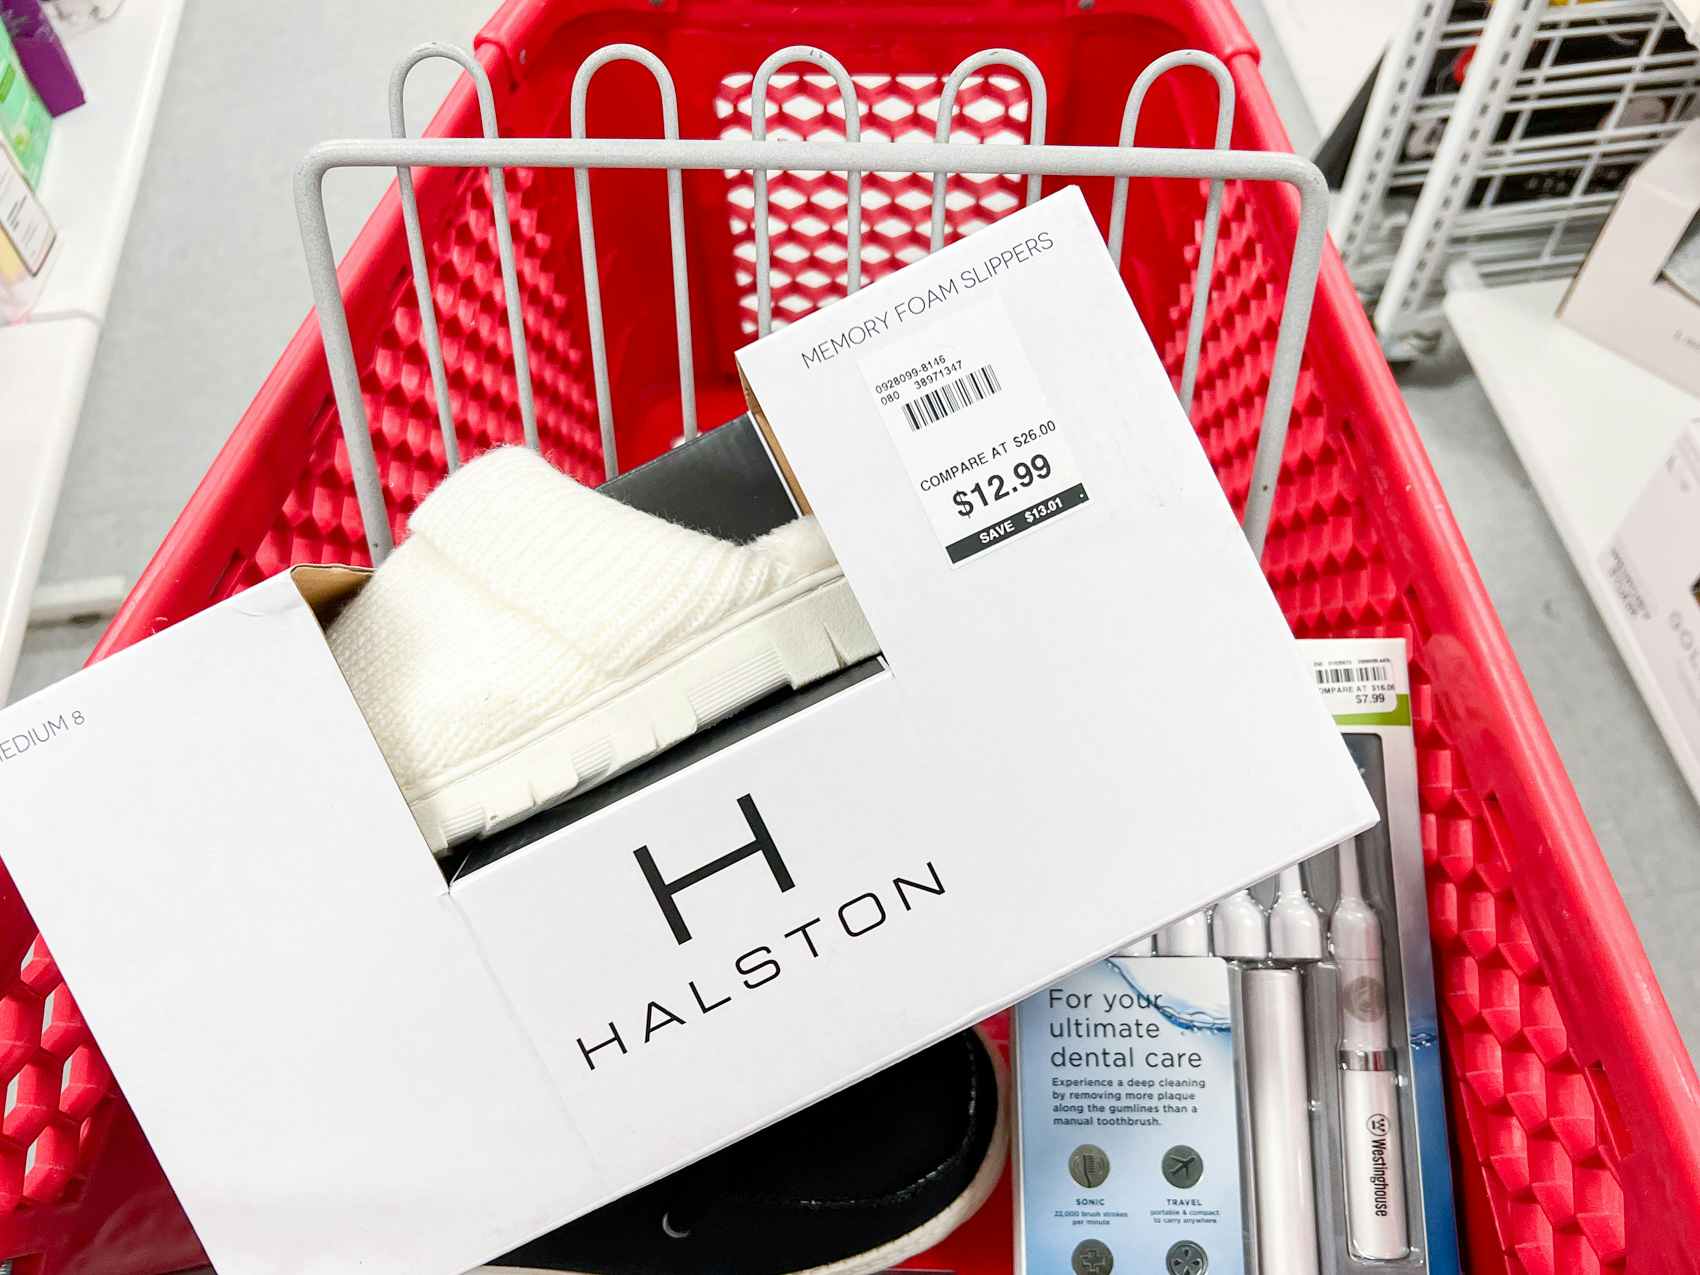 Halston shoes and toothbrush kit inside of a Bealls shopping cart